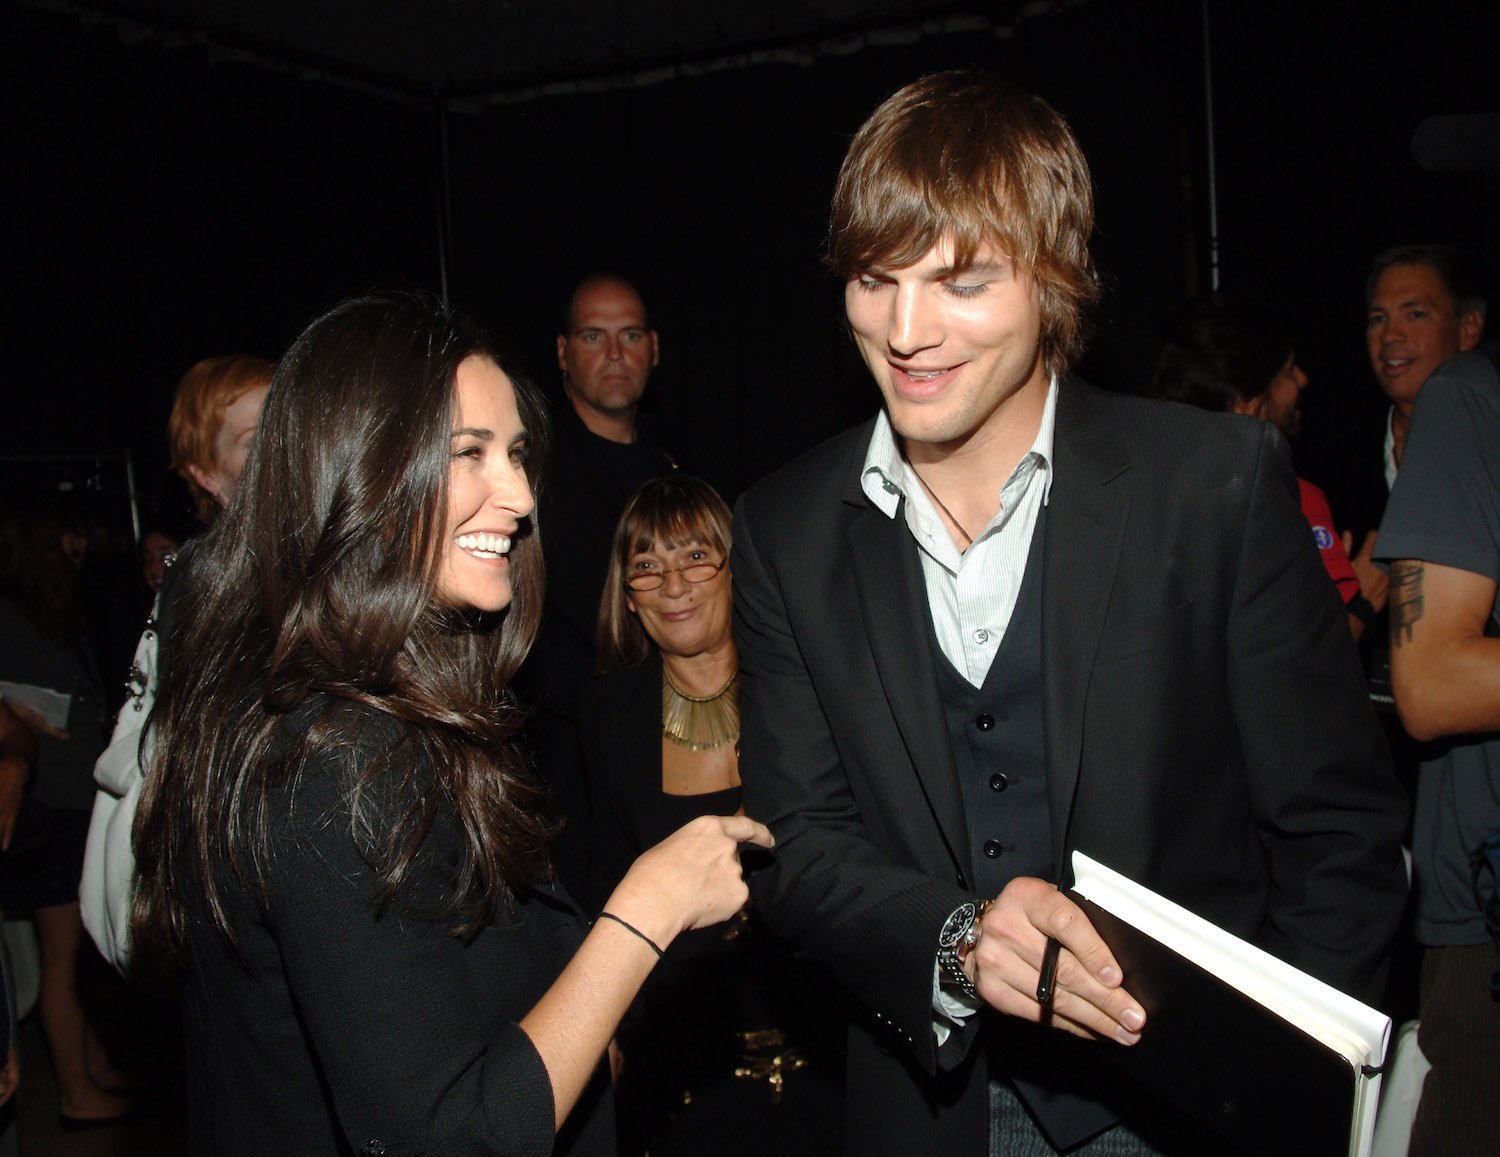 Ashton Kutcher and Demi Moore laughing together at an event